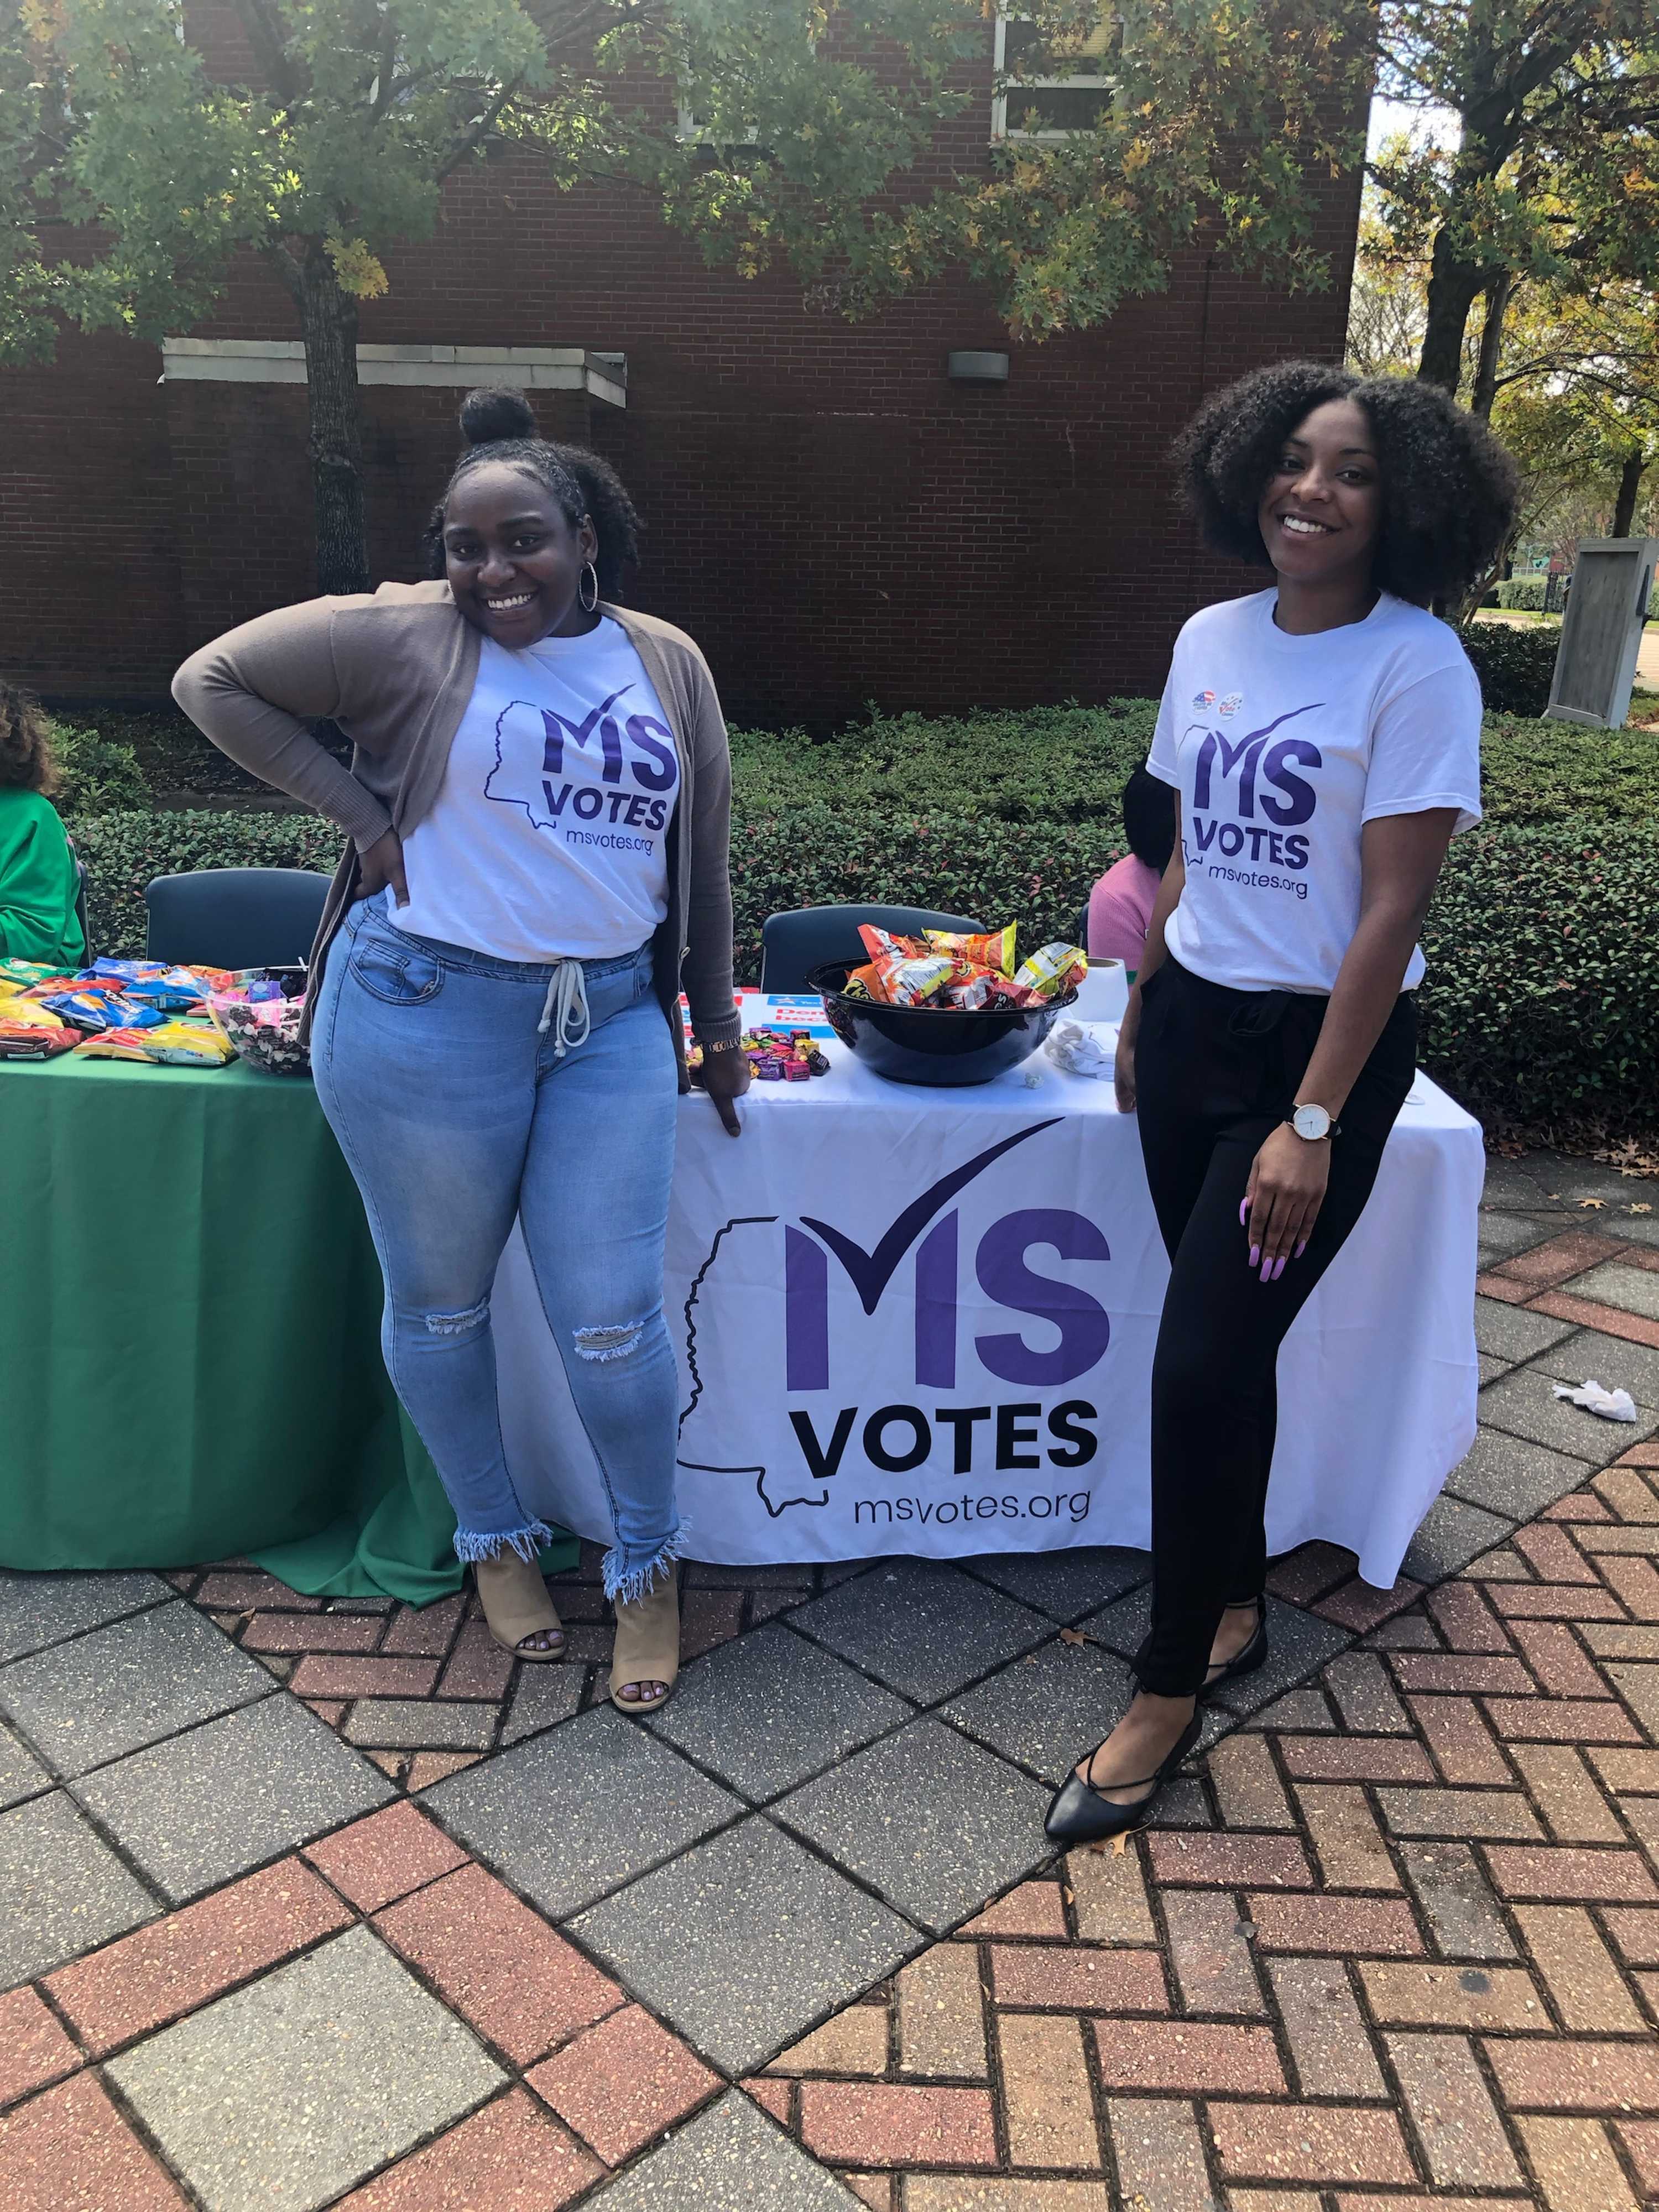 Two women at a college campus ready to tell folks about MS Votes.